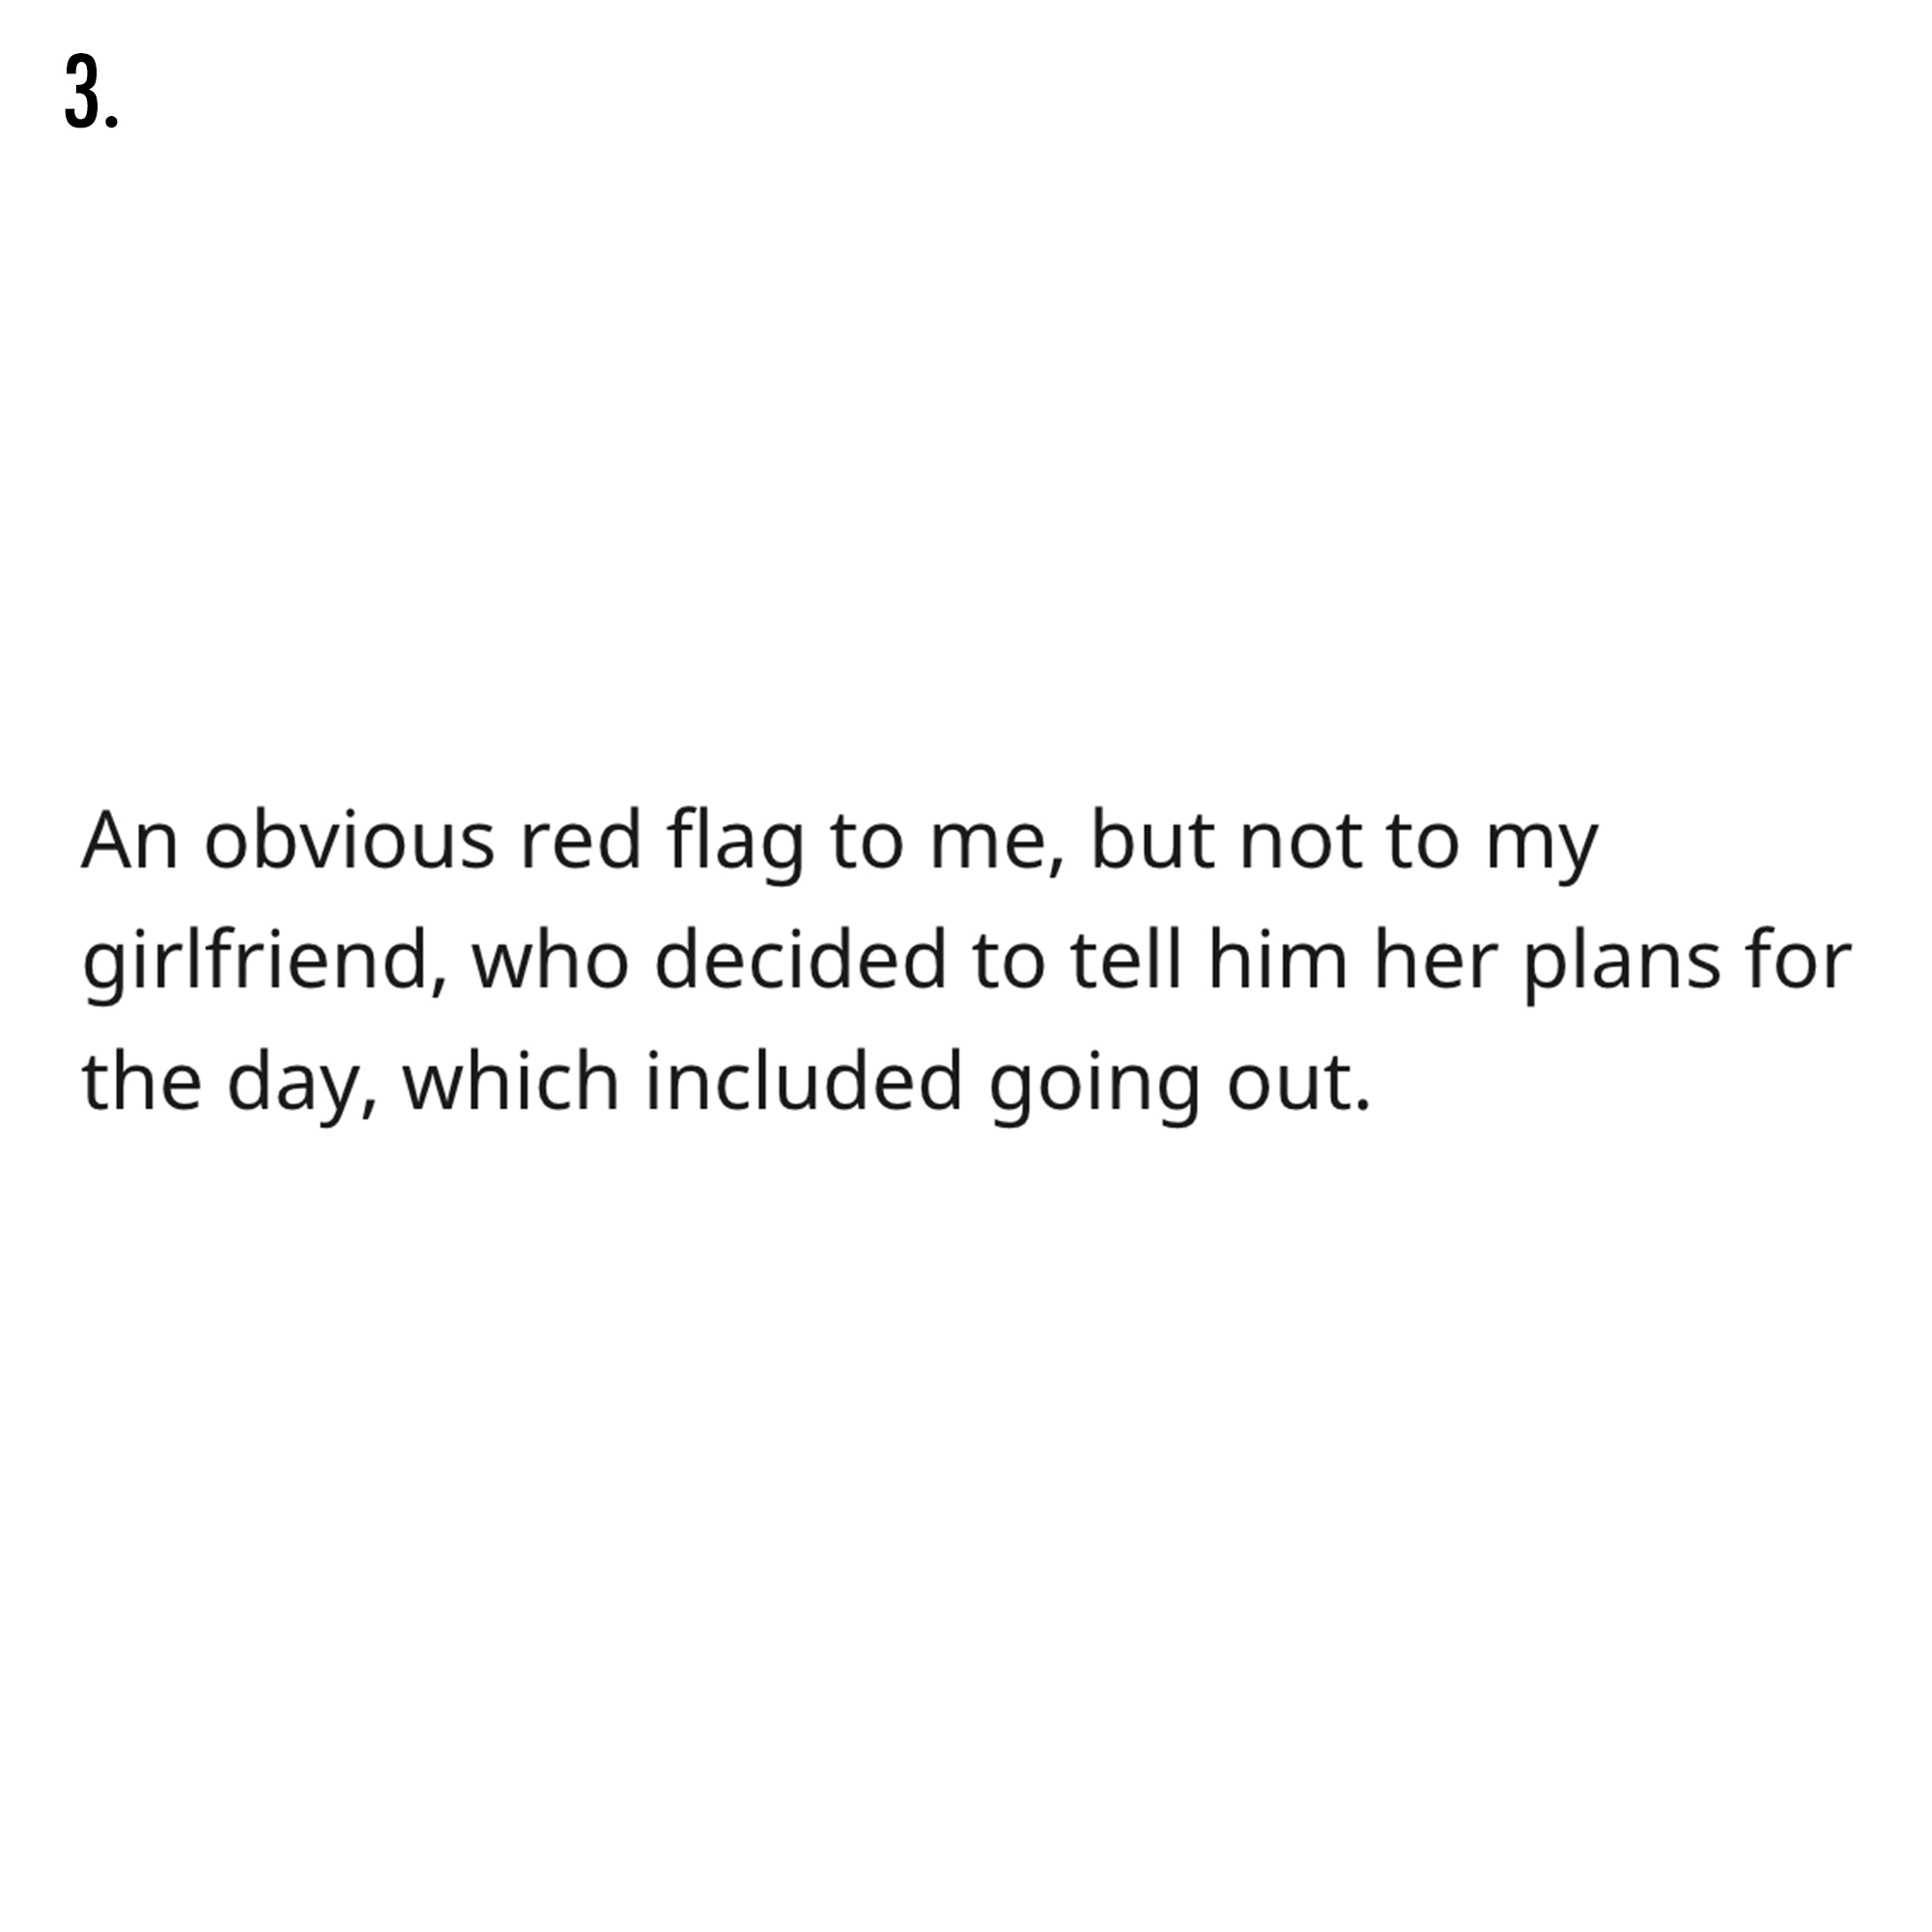 AITA Reddit Story - document - 3. An obvious red flag to me, but not to my girlfriend, who decided to tell him her plans for the day, which included going out.